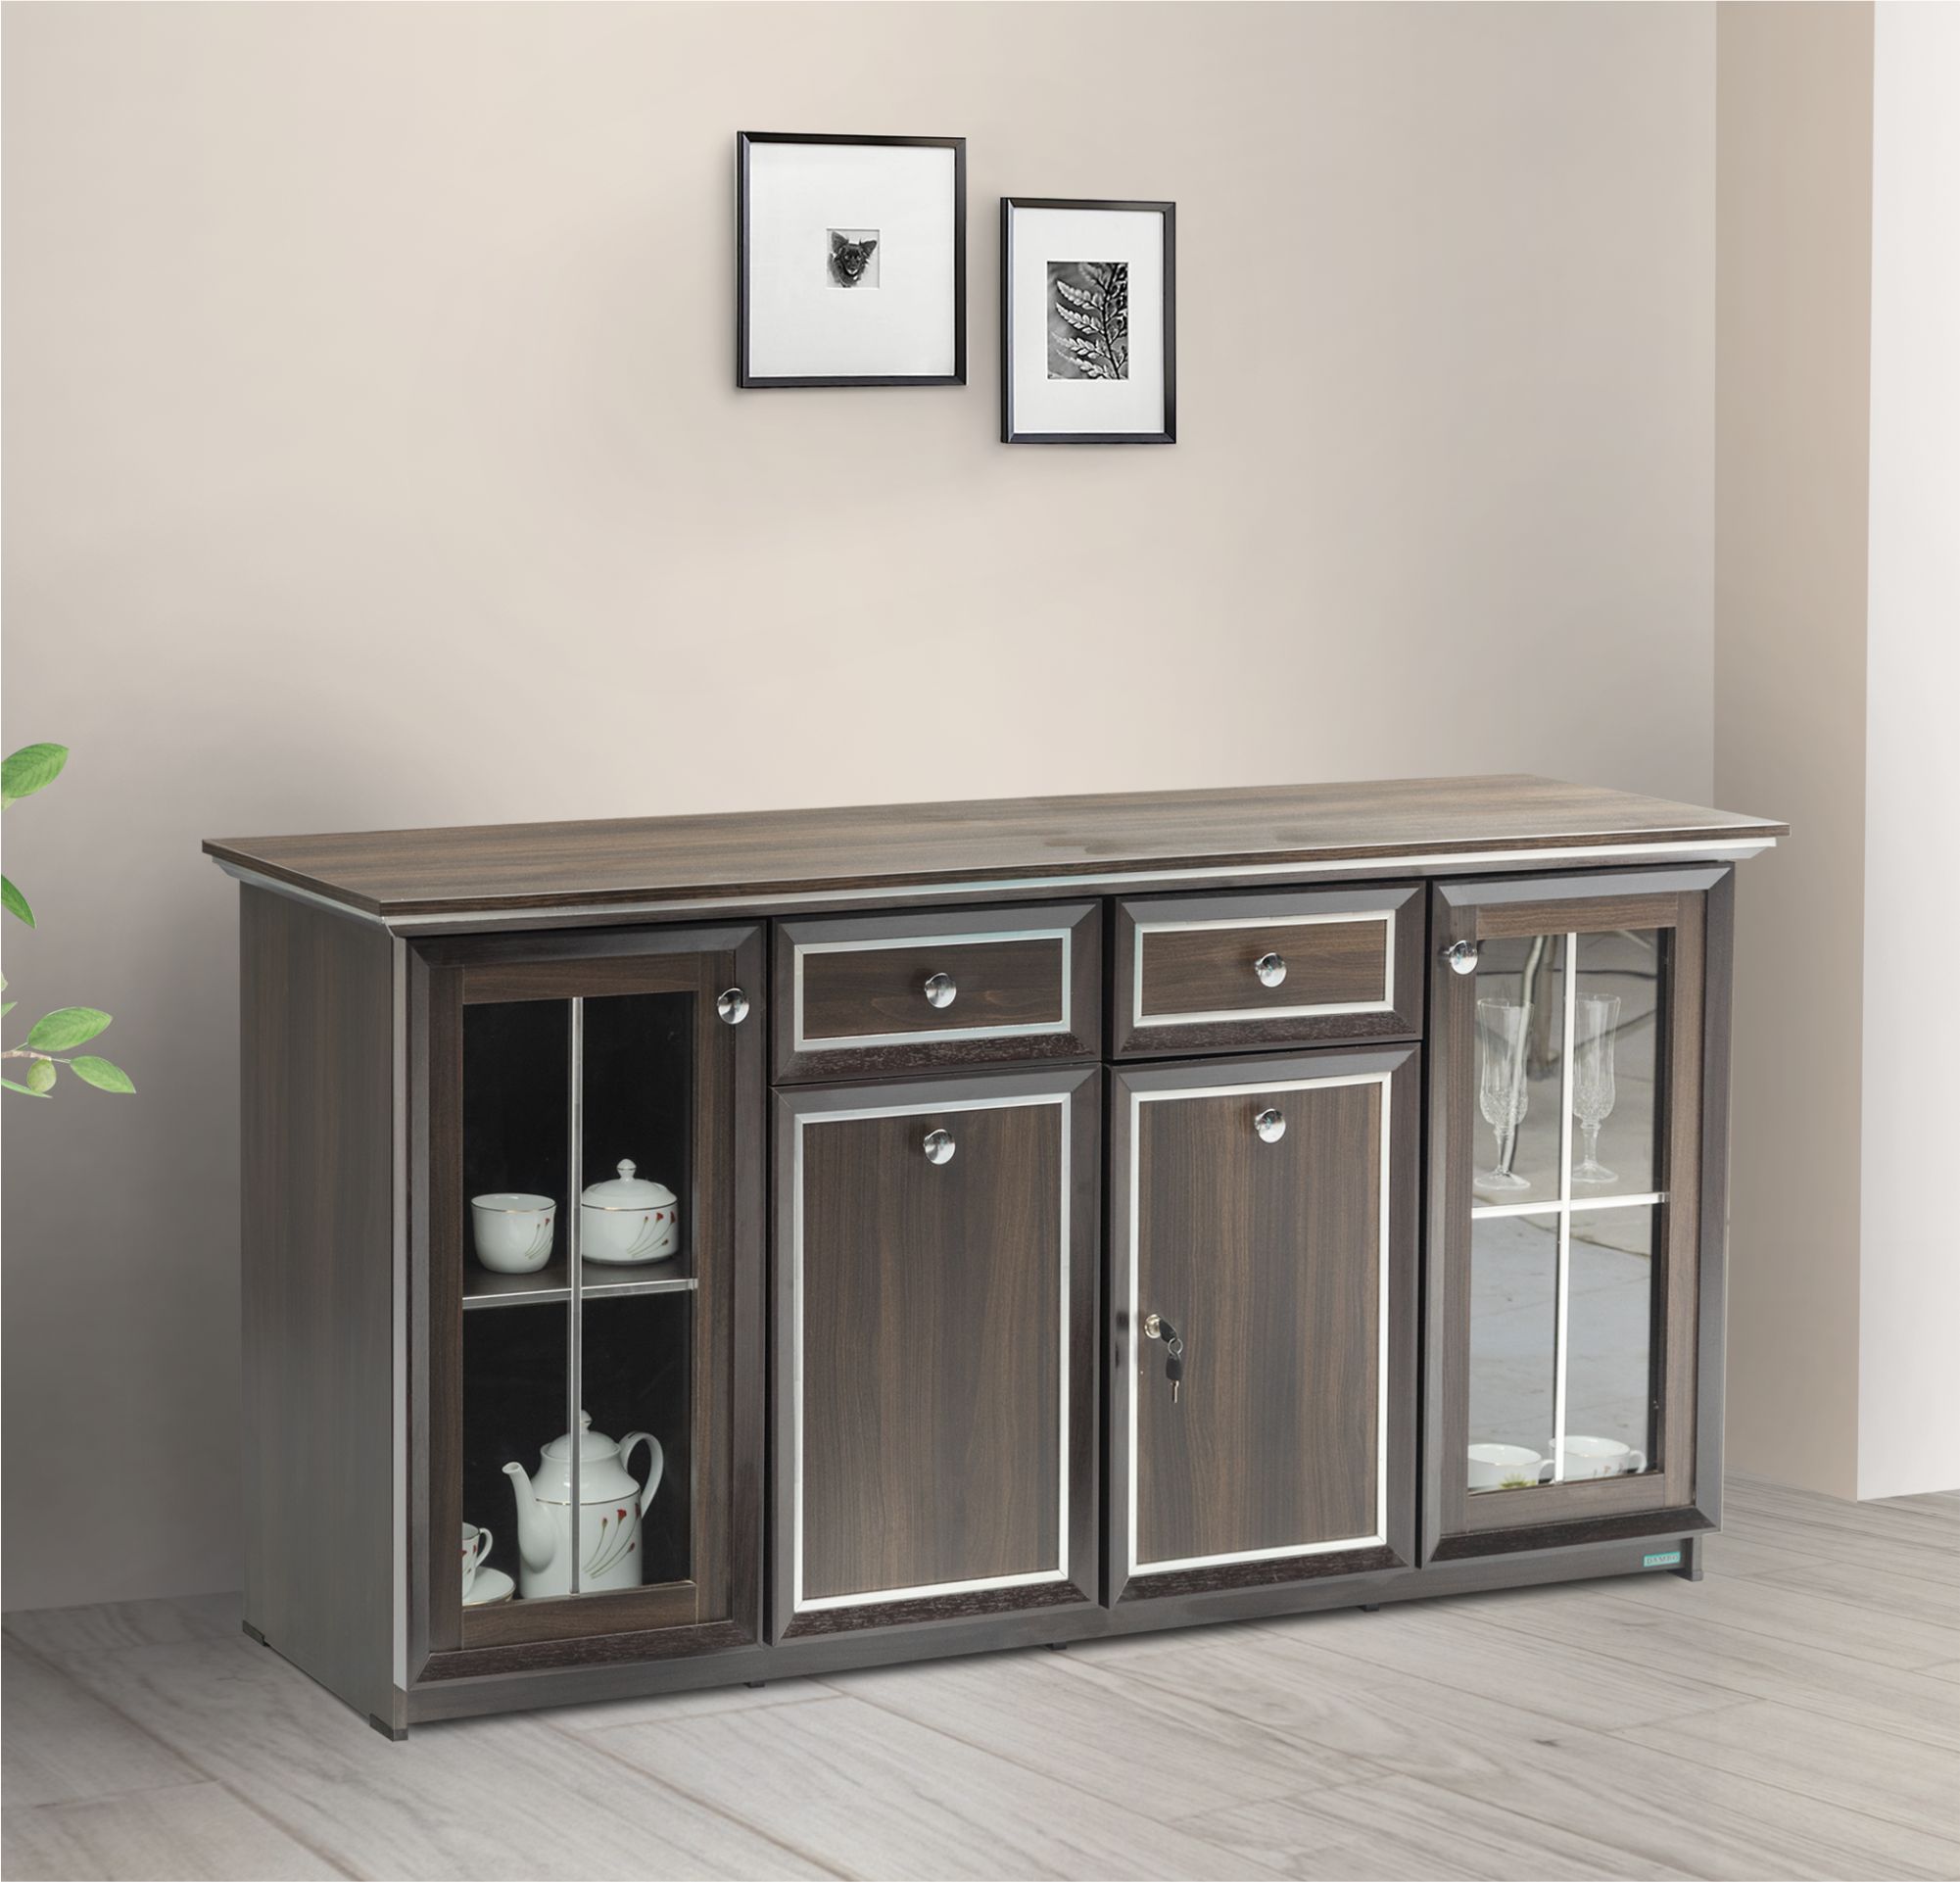 KDC009-Dining Cabinet With 2 Drawers-M42